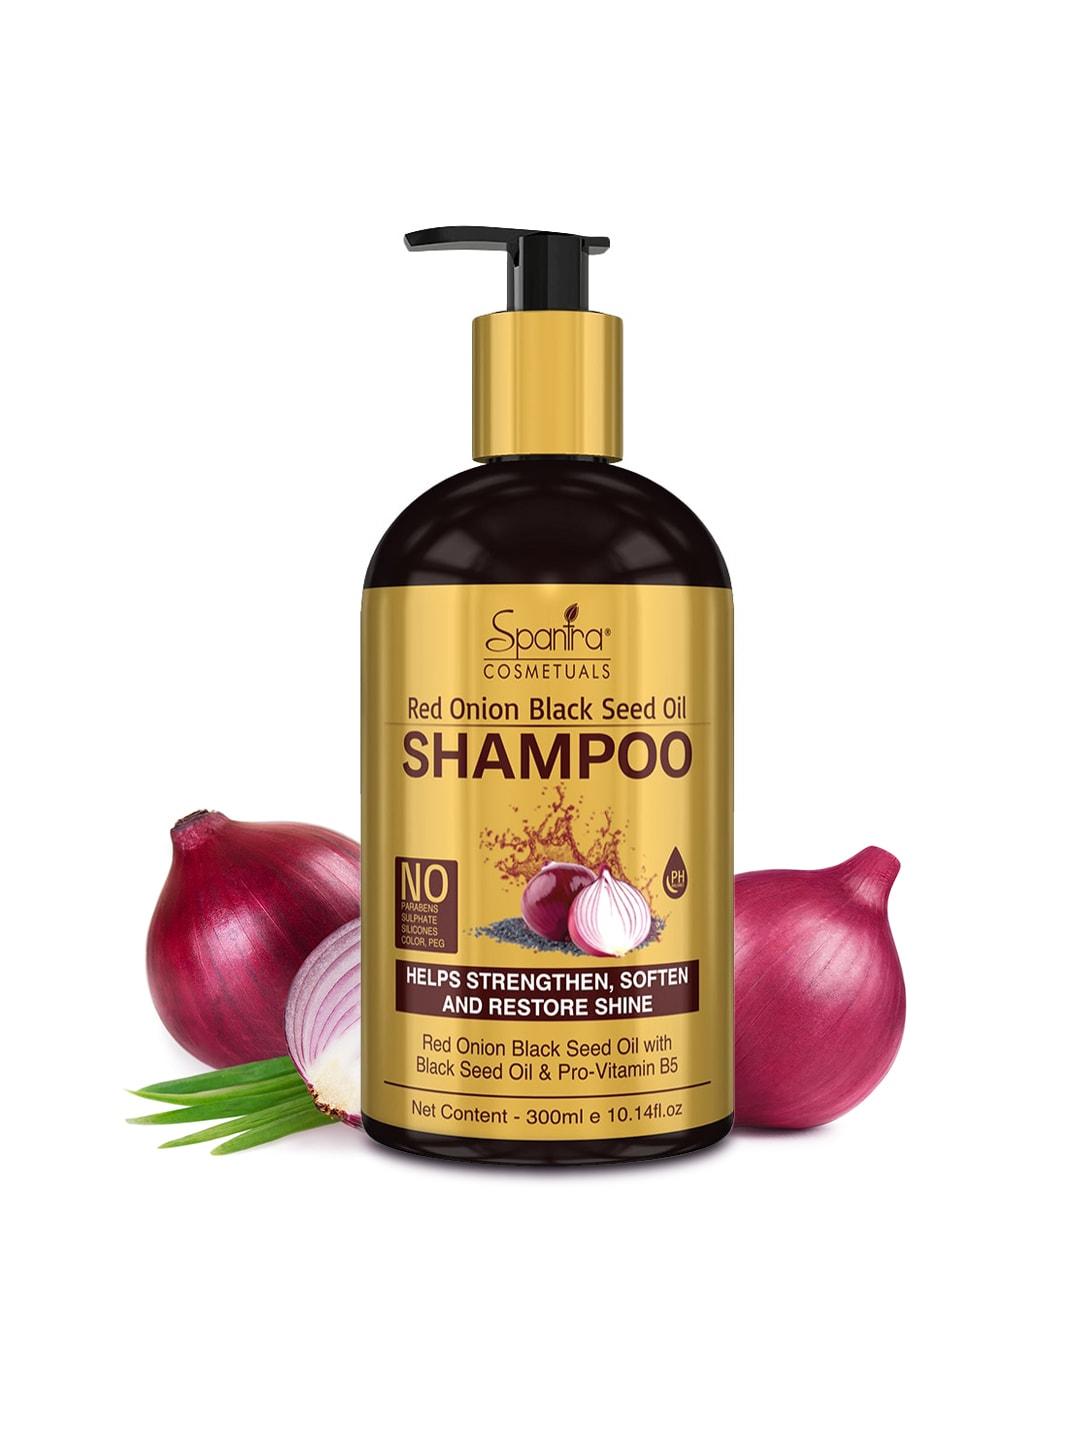 spantra red onion black seed oil shampoo helps strengthen, soften and restore shine, 300ml